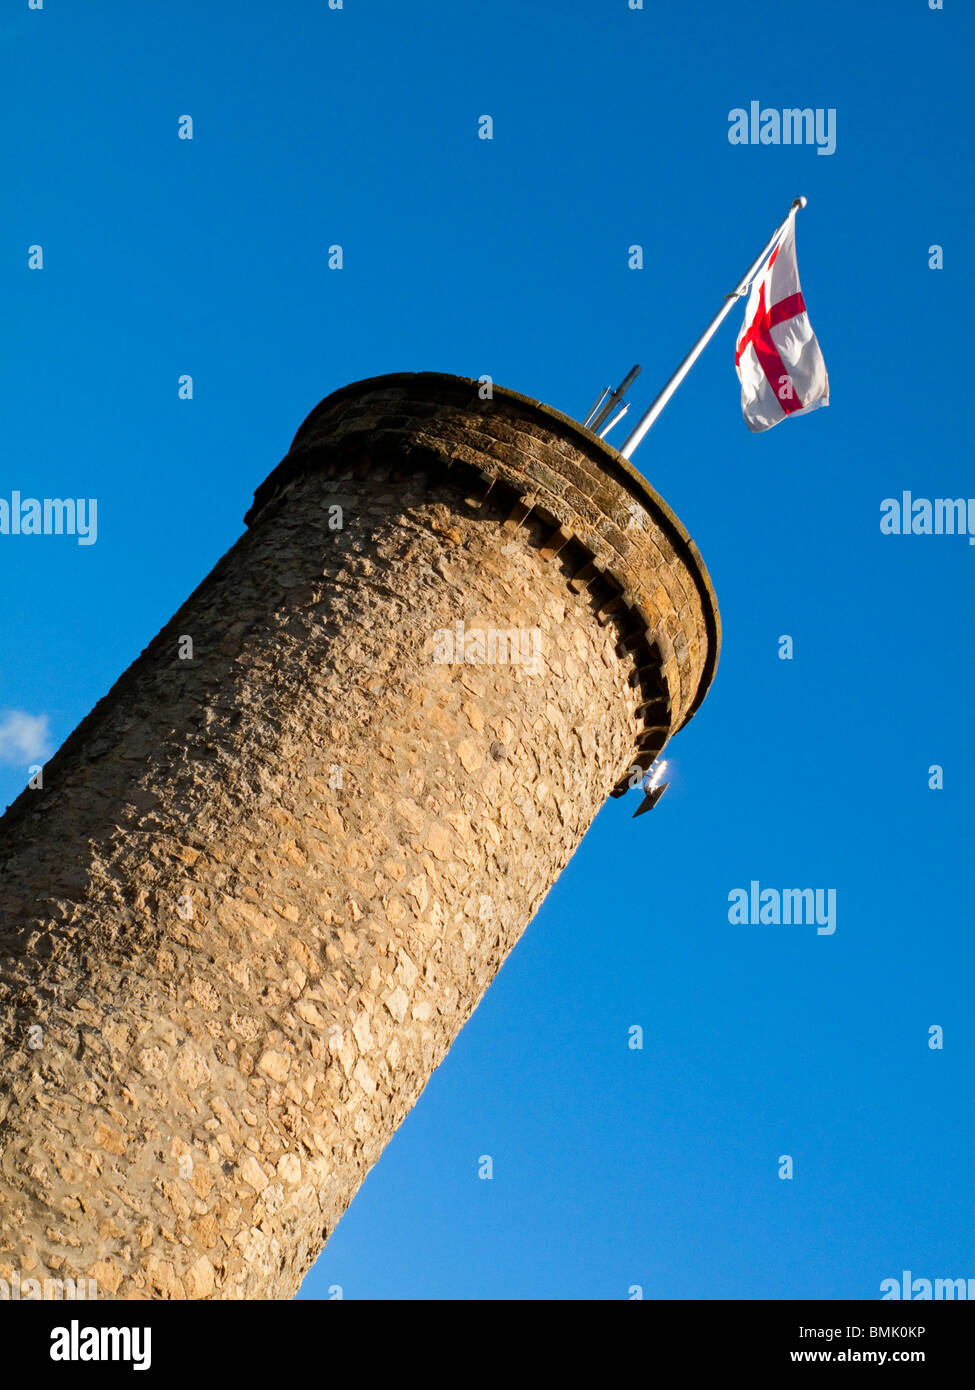 Prospect Tower at the Heights of Abraham theme park in Matlock Bath Derbyshire Peak District UK with England flag flying Stock Photo